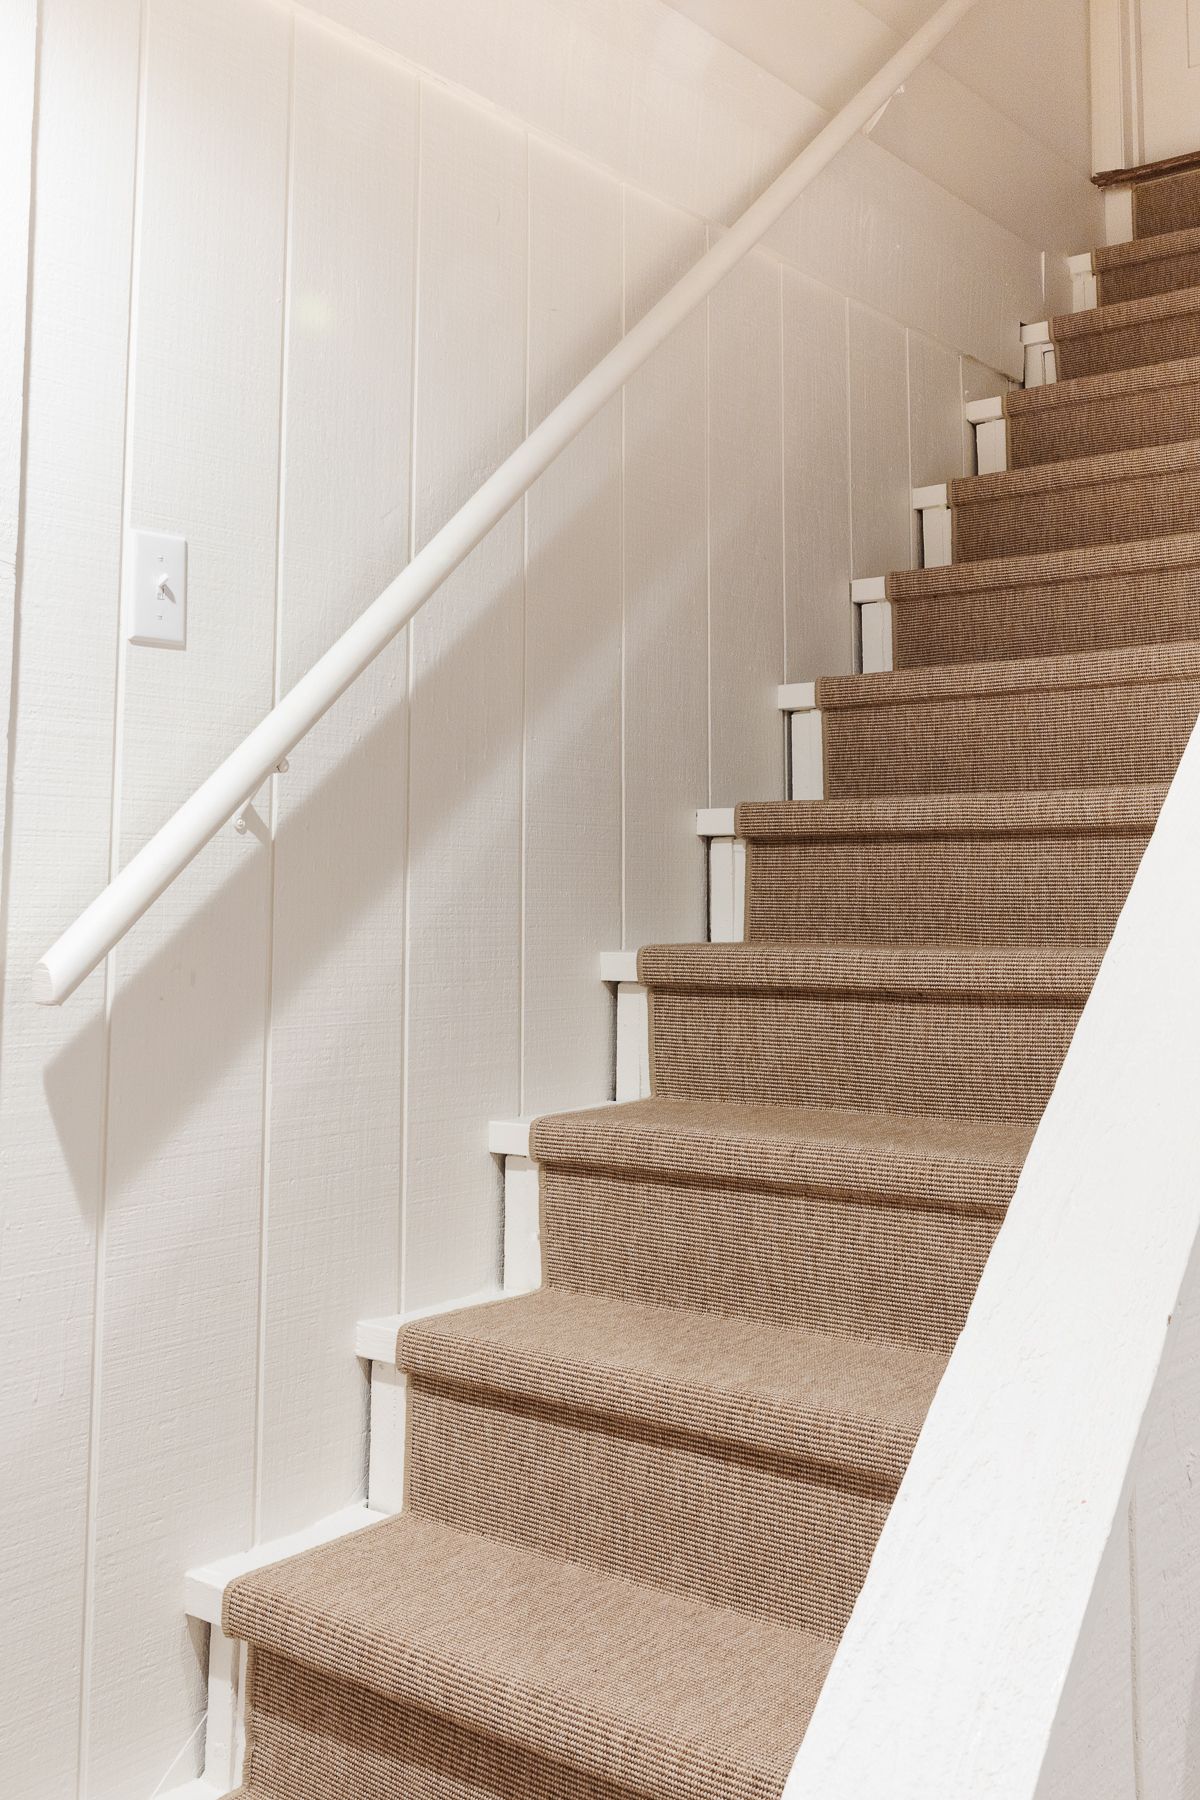 A basement staircase with a modern stair runner